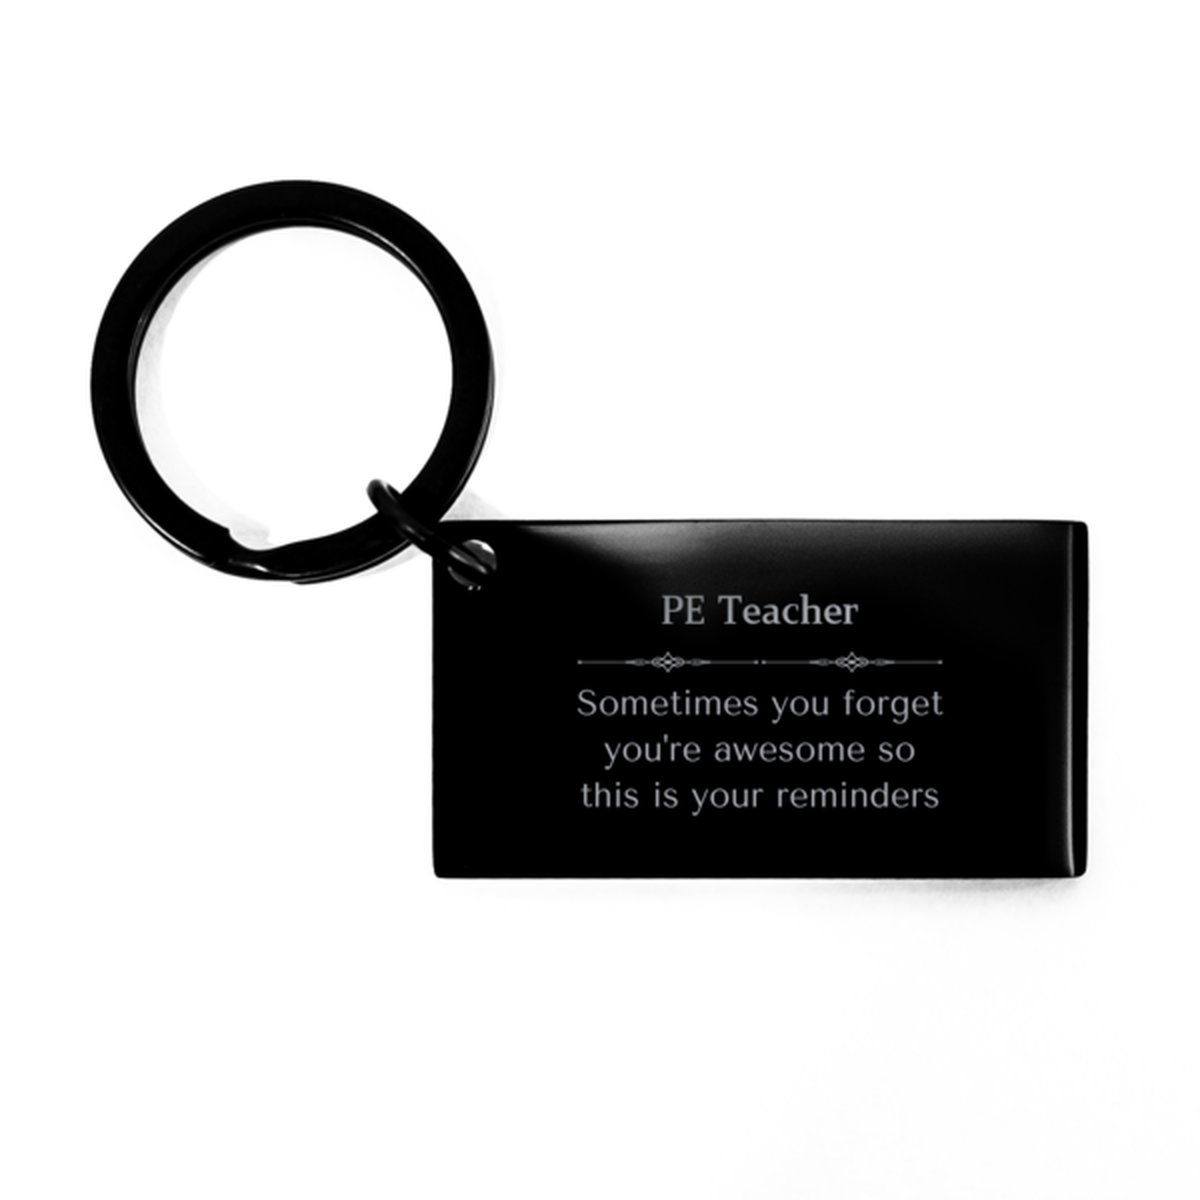 Sentimental PE Teacher Keychain, Rancher Sometimes you forget you're awesome so this is your reminders, Graduation Christmas Birthday Gifts for PE Teacher, Men, Women, Coworkers